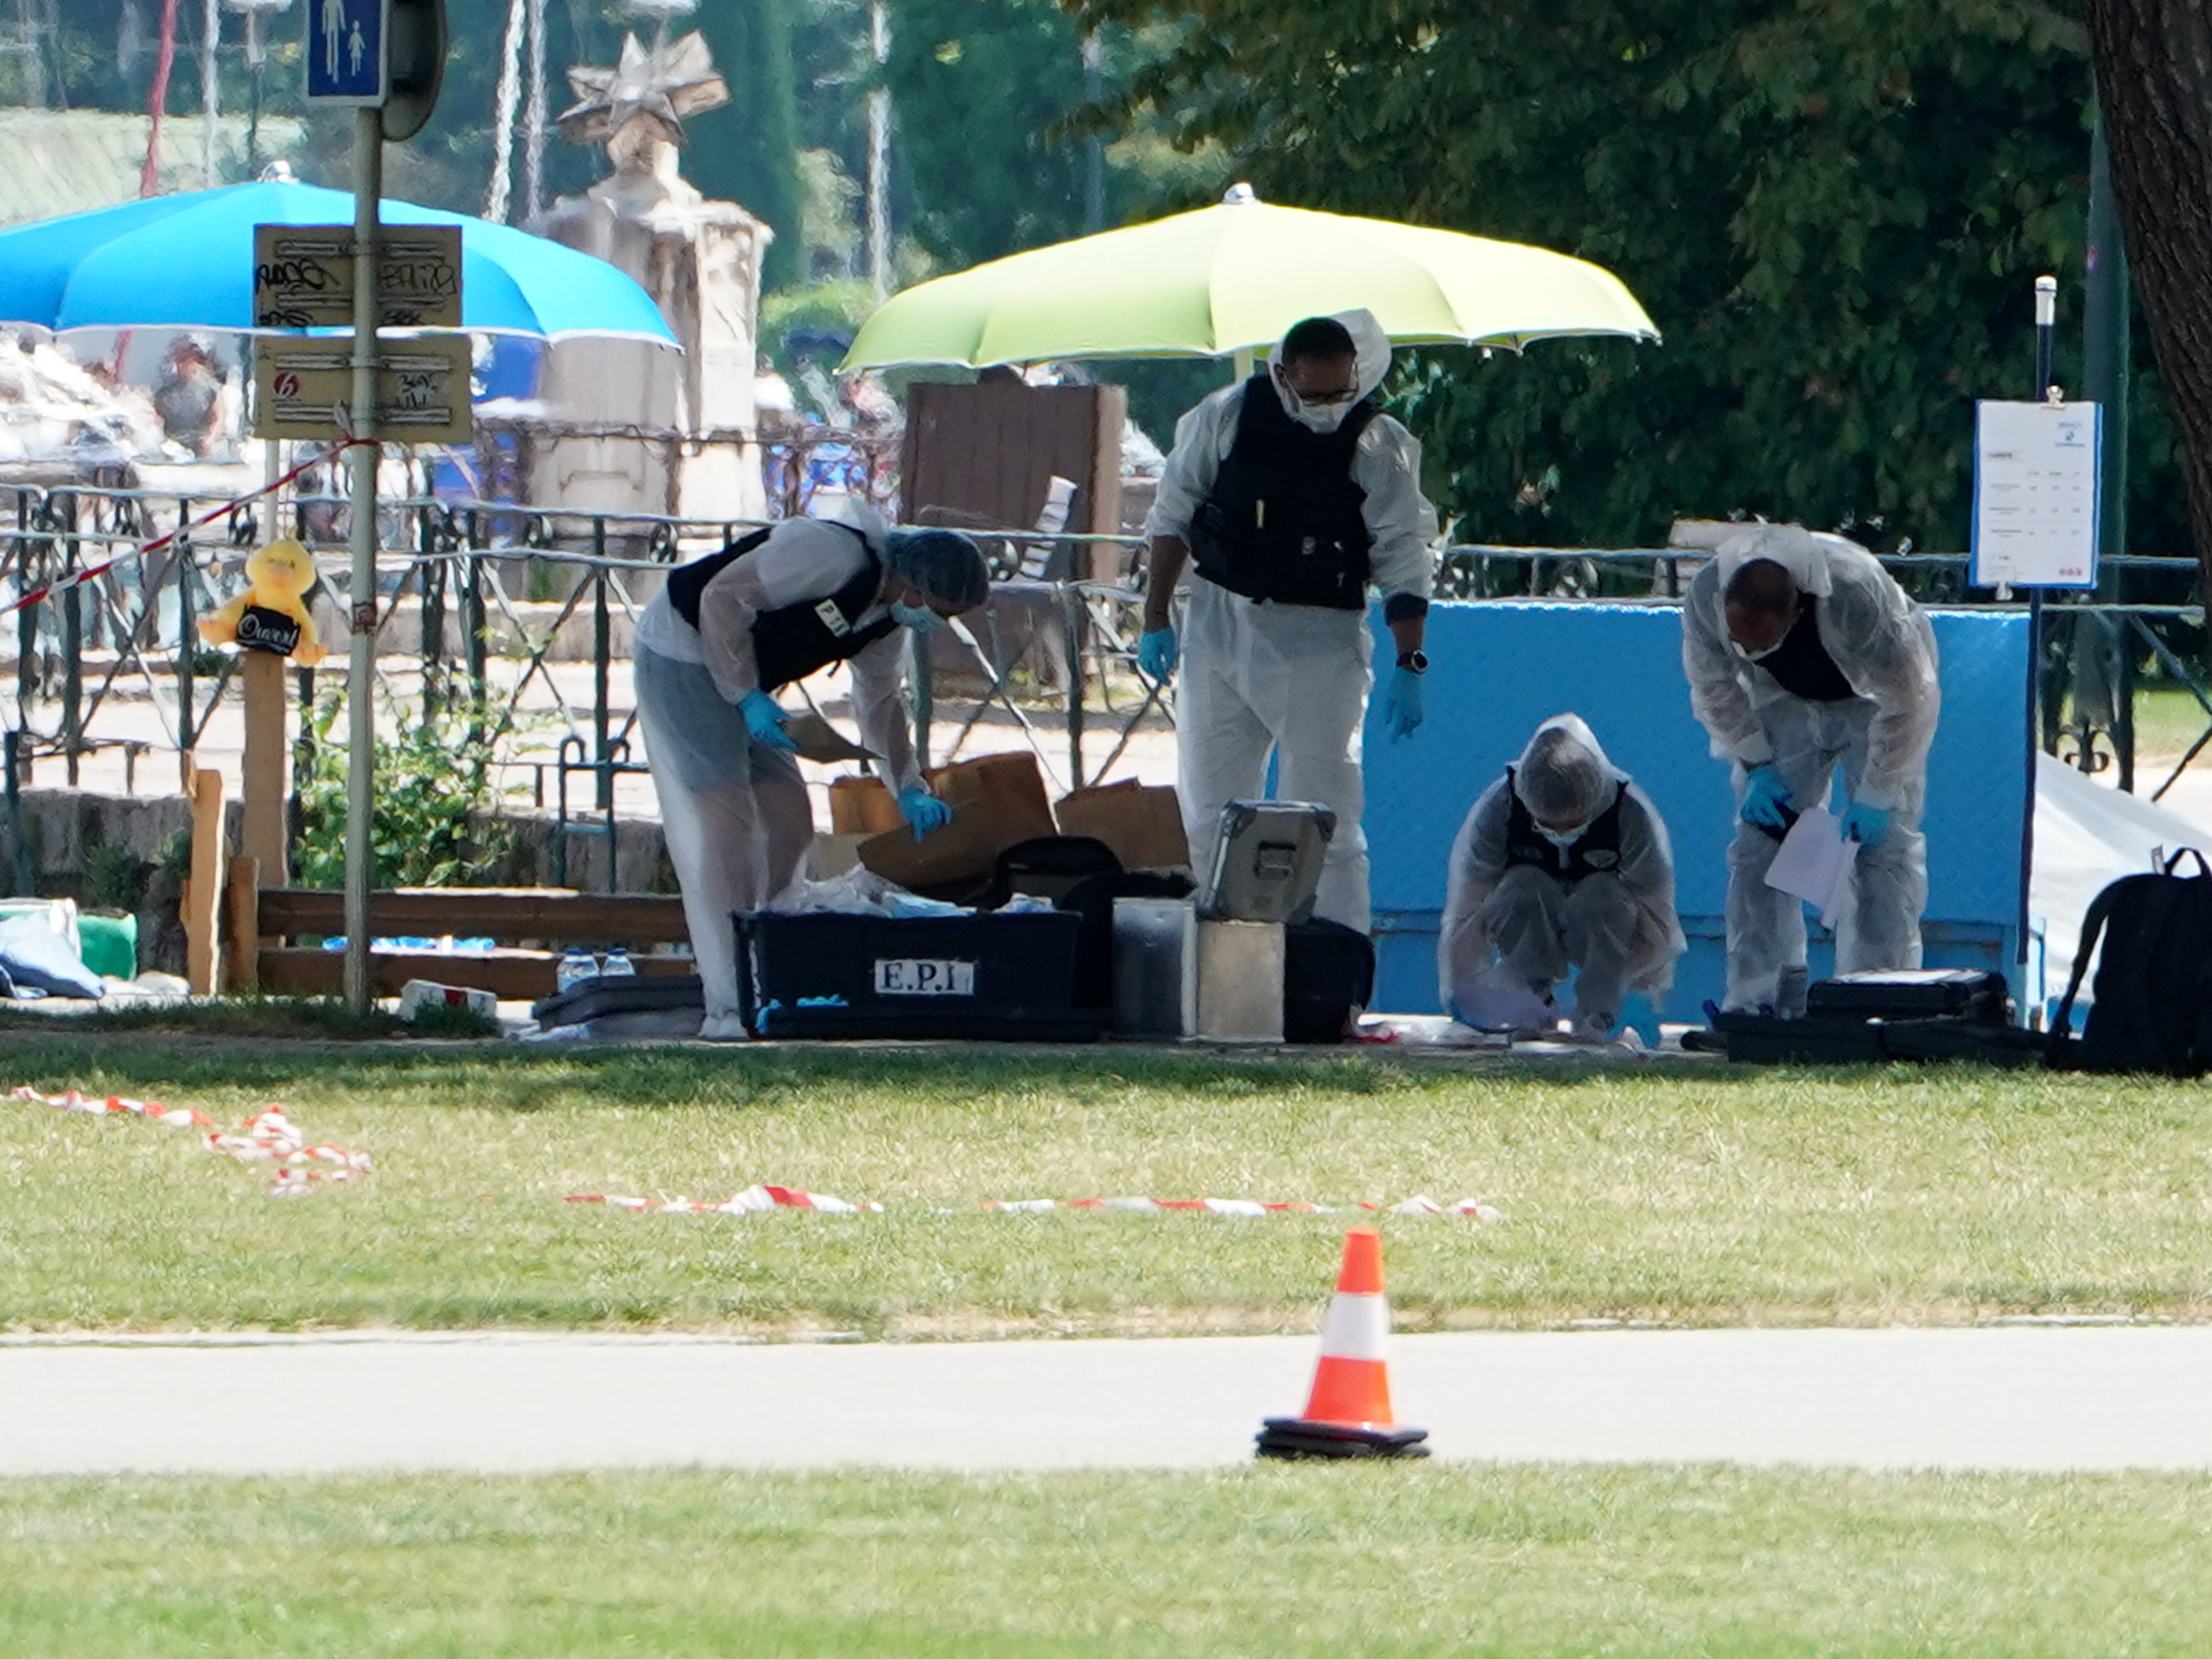 Forensics officers investigate at the scene